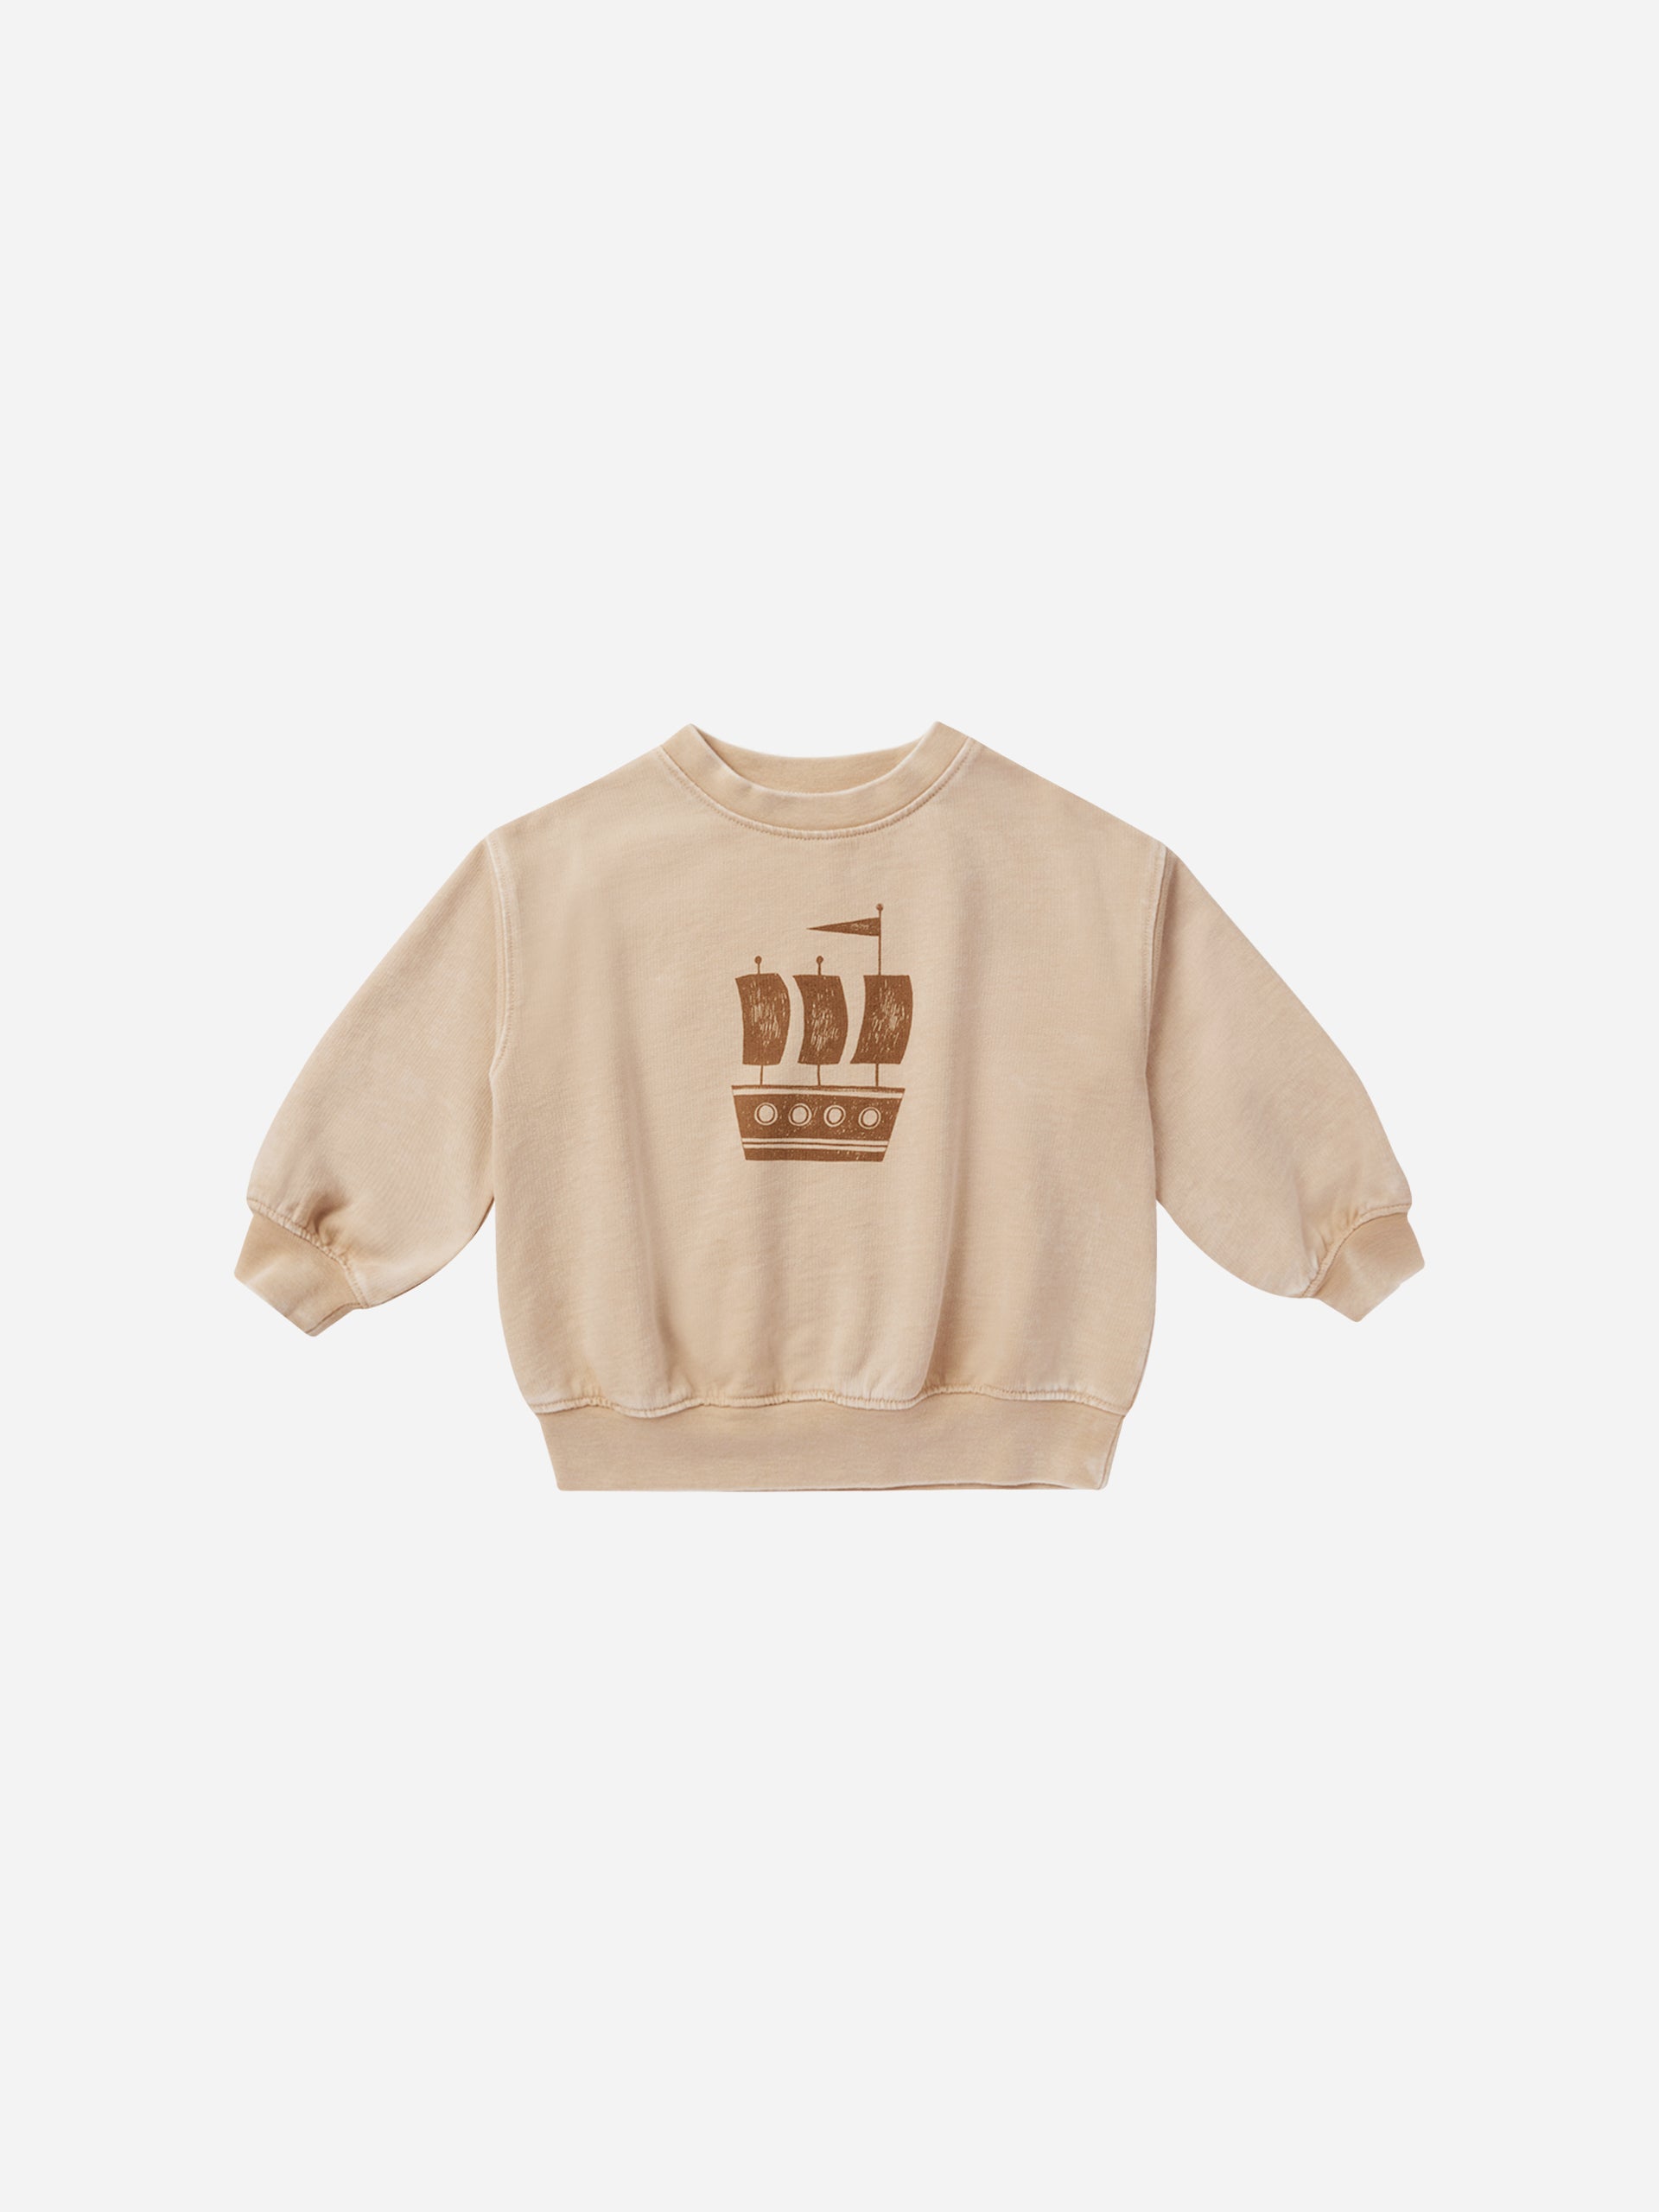 Relaxed Sweatshirt || Ship - Rylee + Cru | Kids Clothes | Trendy Baby Clothes | Modern Infant Outfits |